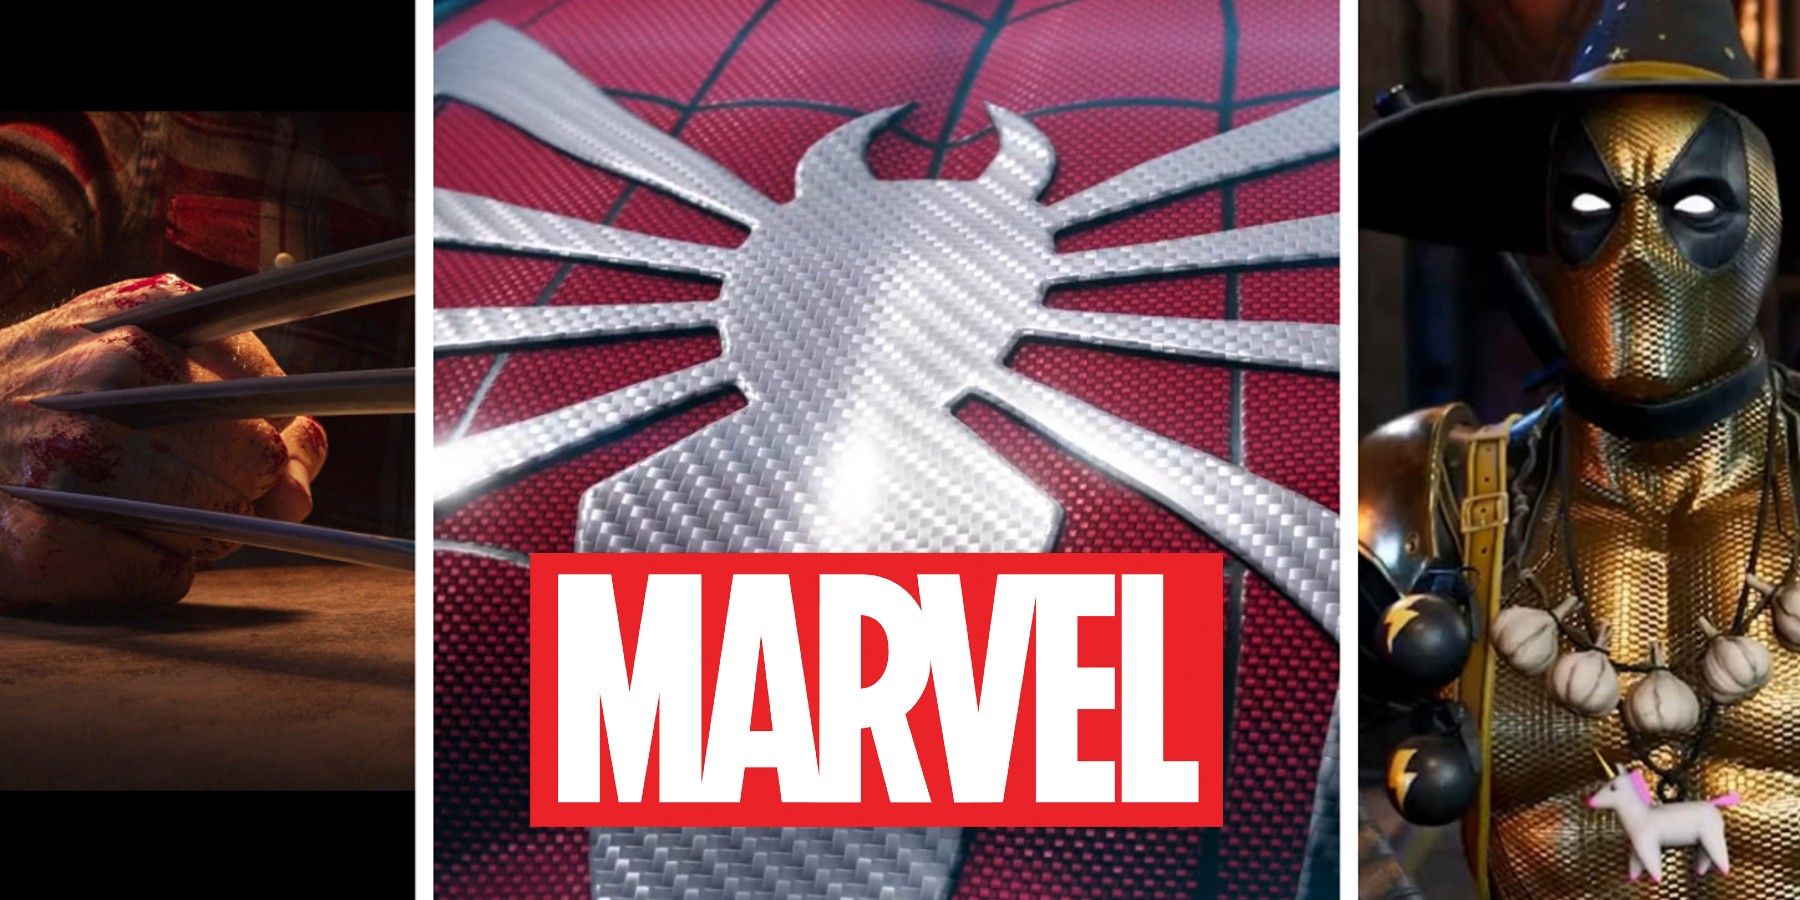 Insomniac Wolverine Spiderman 3 Ea has a slew of marvel games Ironman